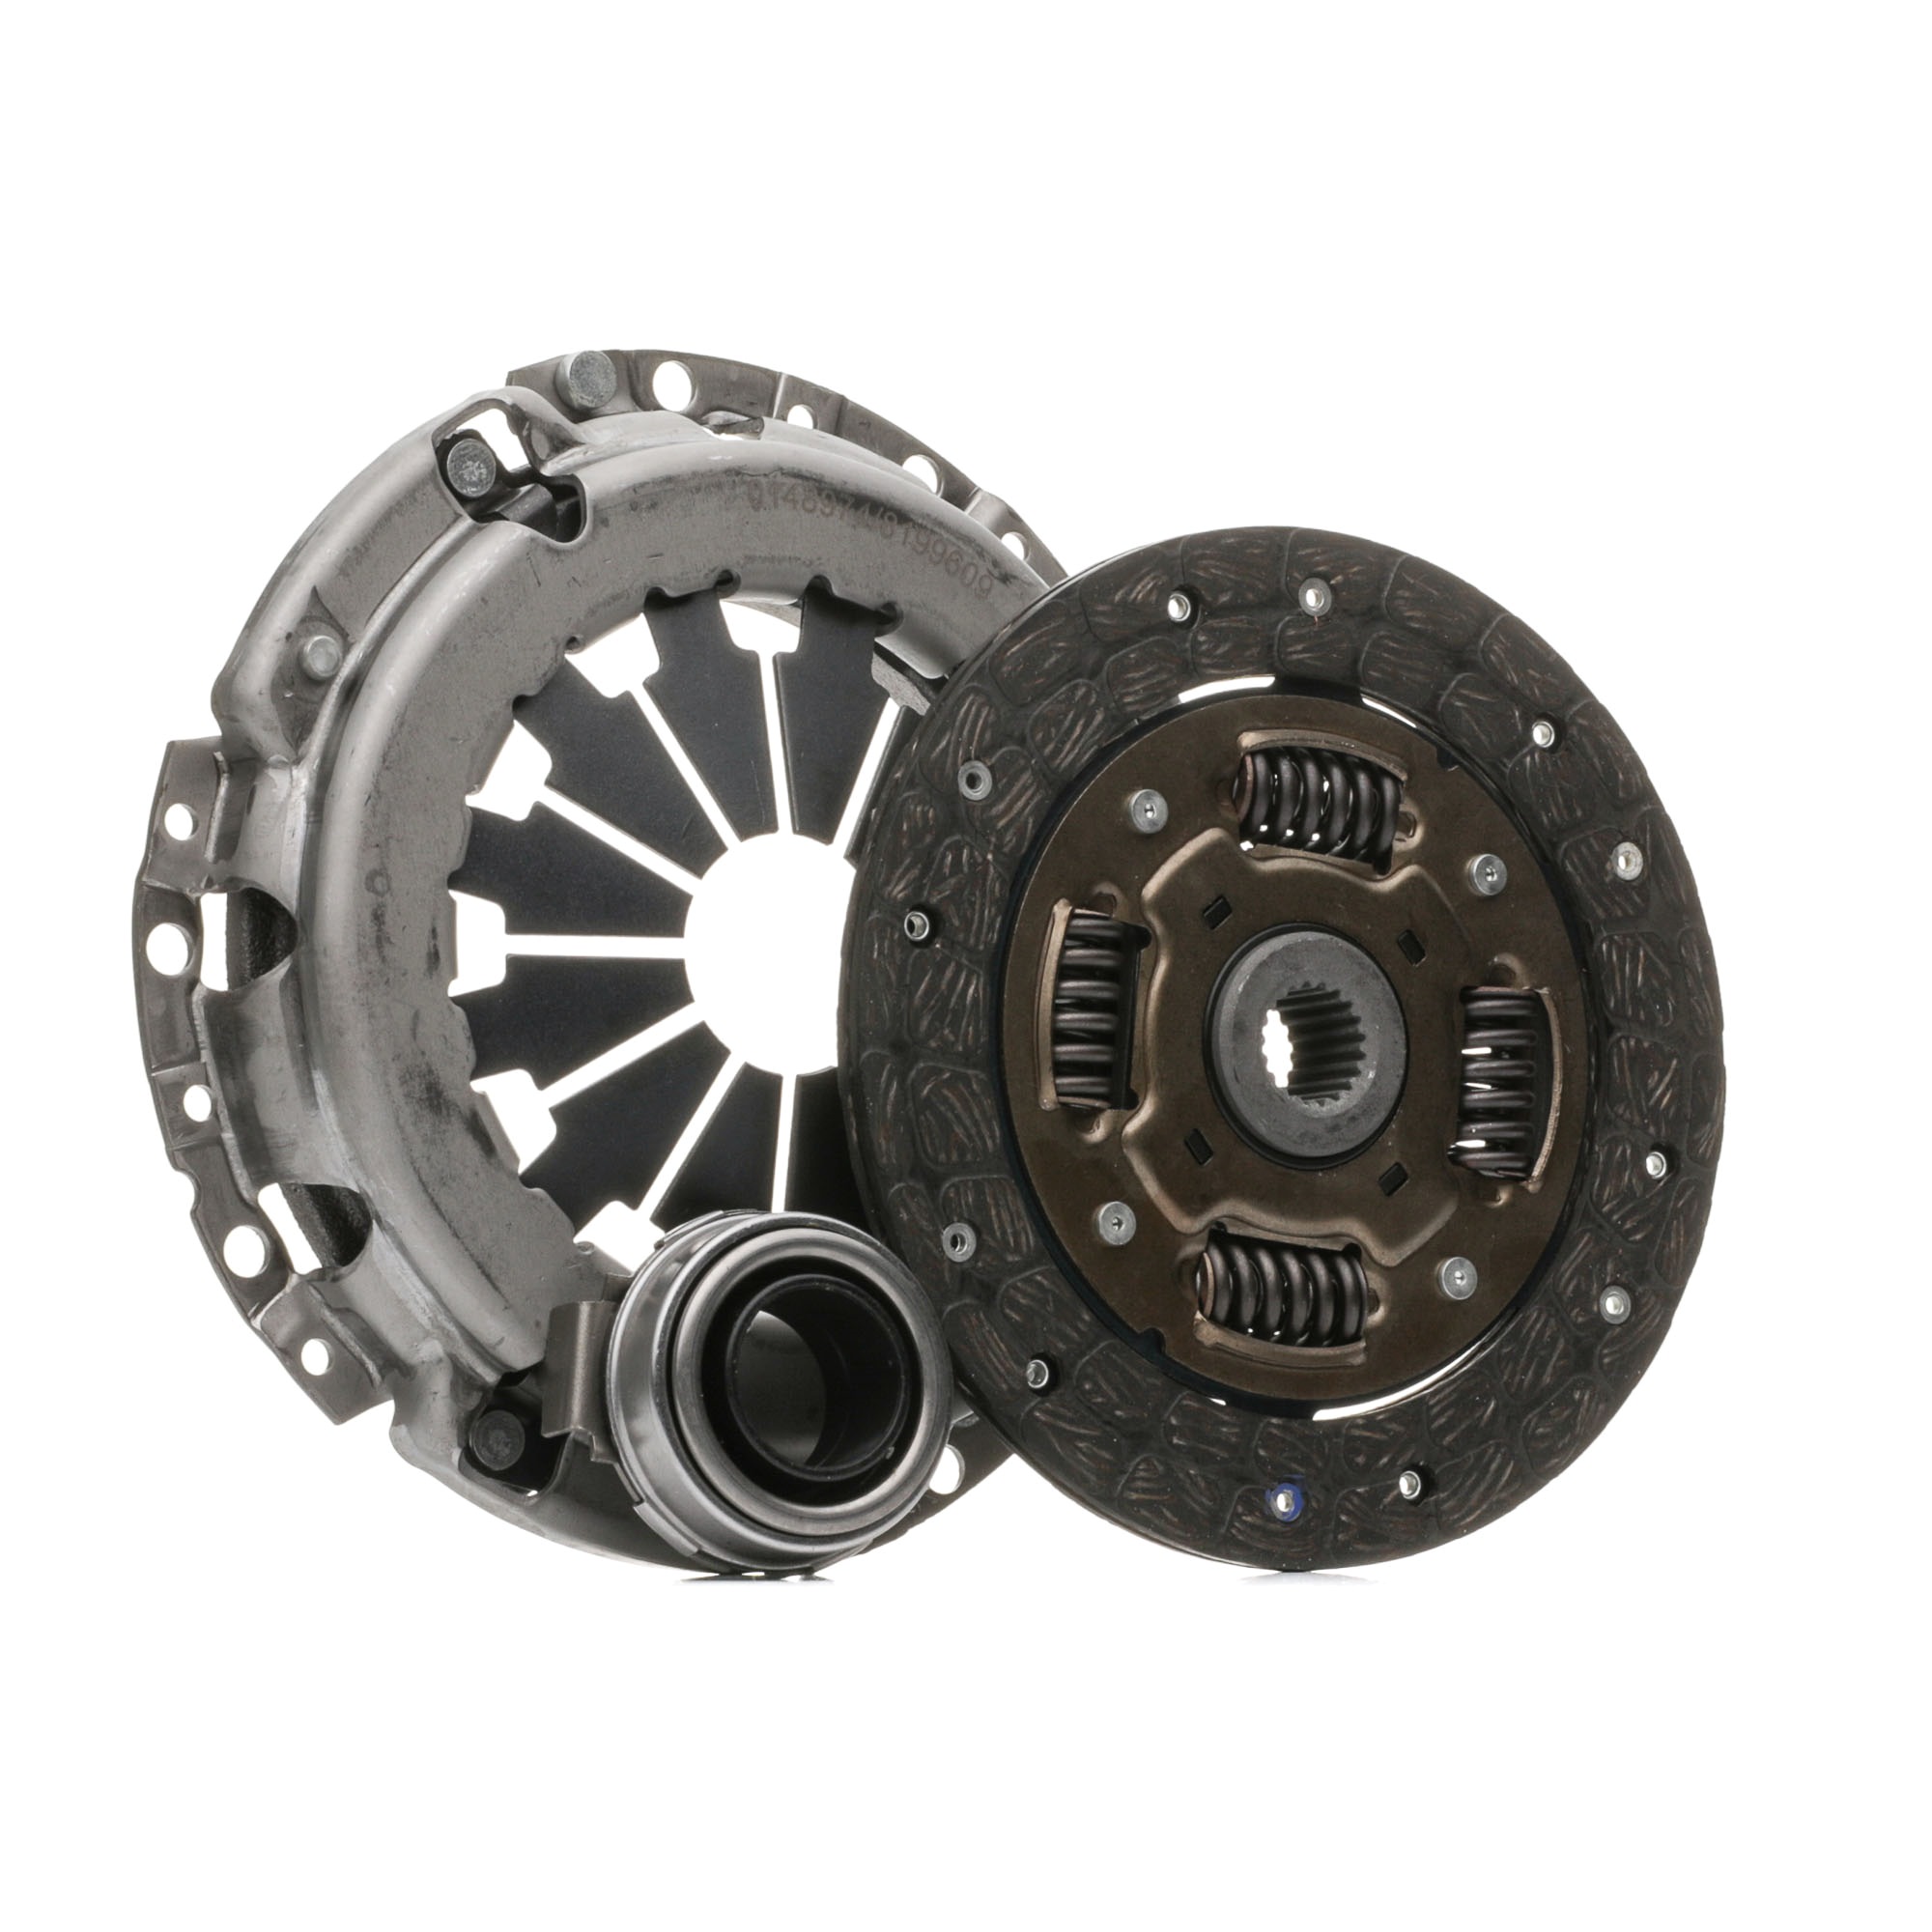 STARK SKCK-0100209 Clutch kit three-piece, with clutch release bearing, with clutch disc, 190mm